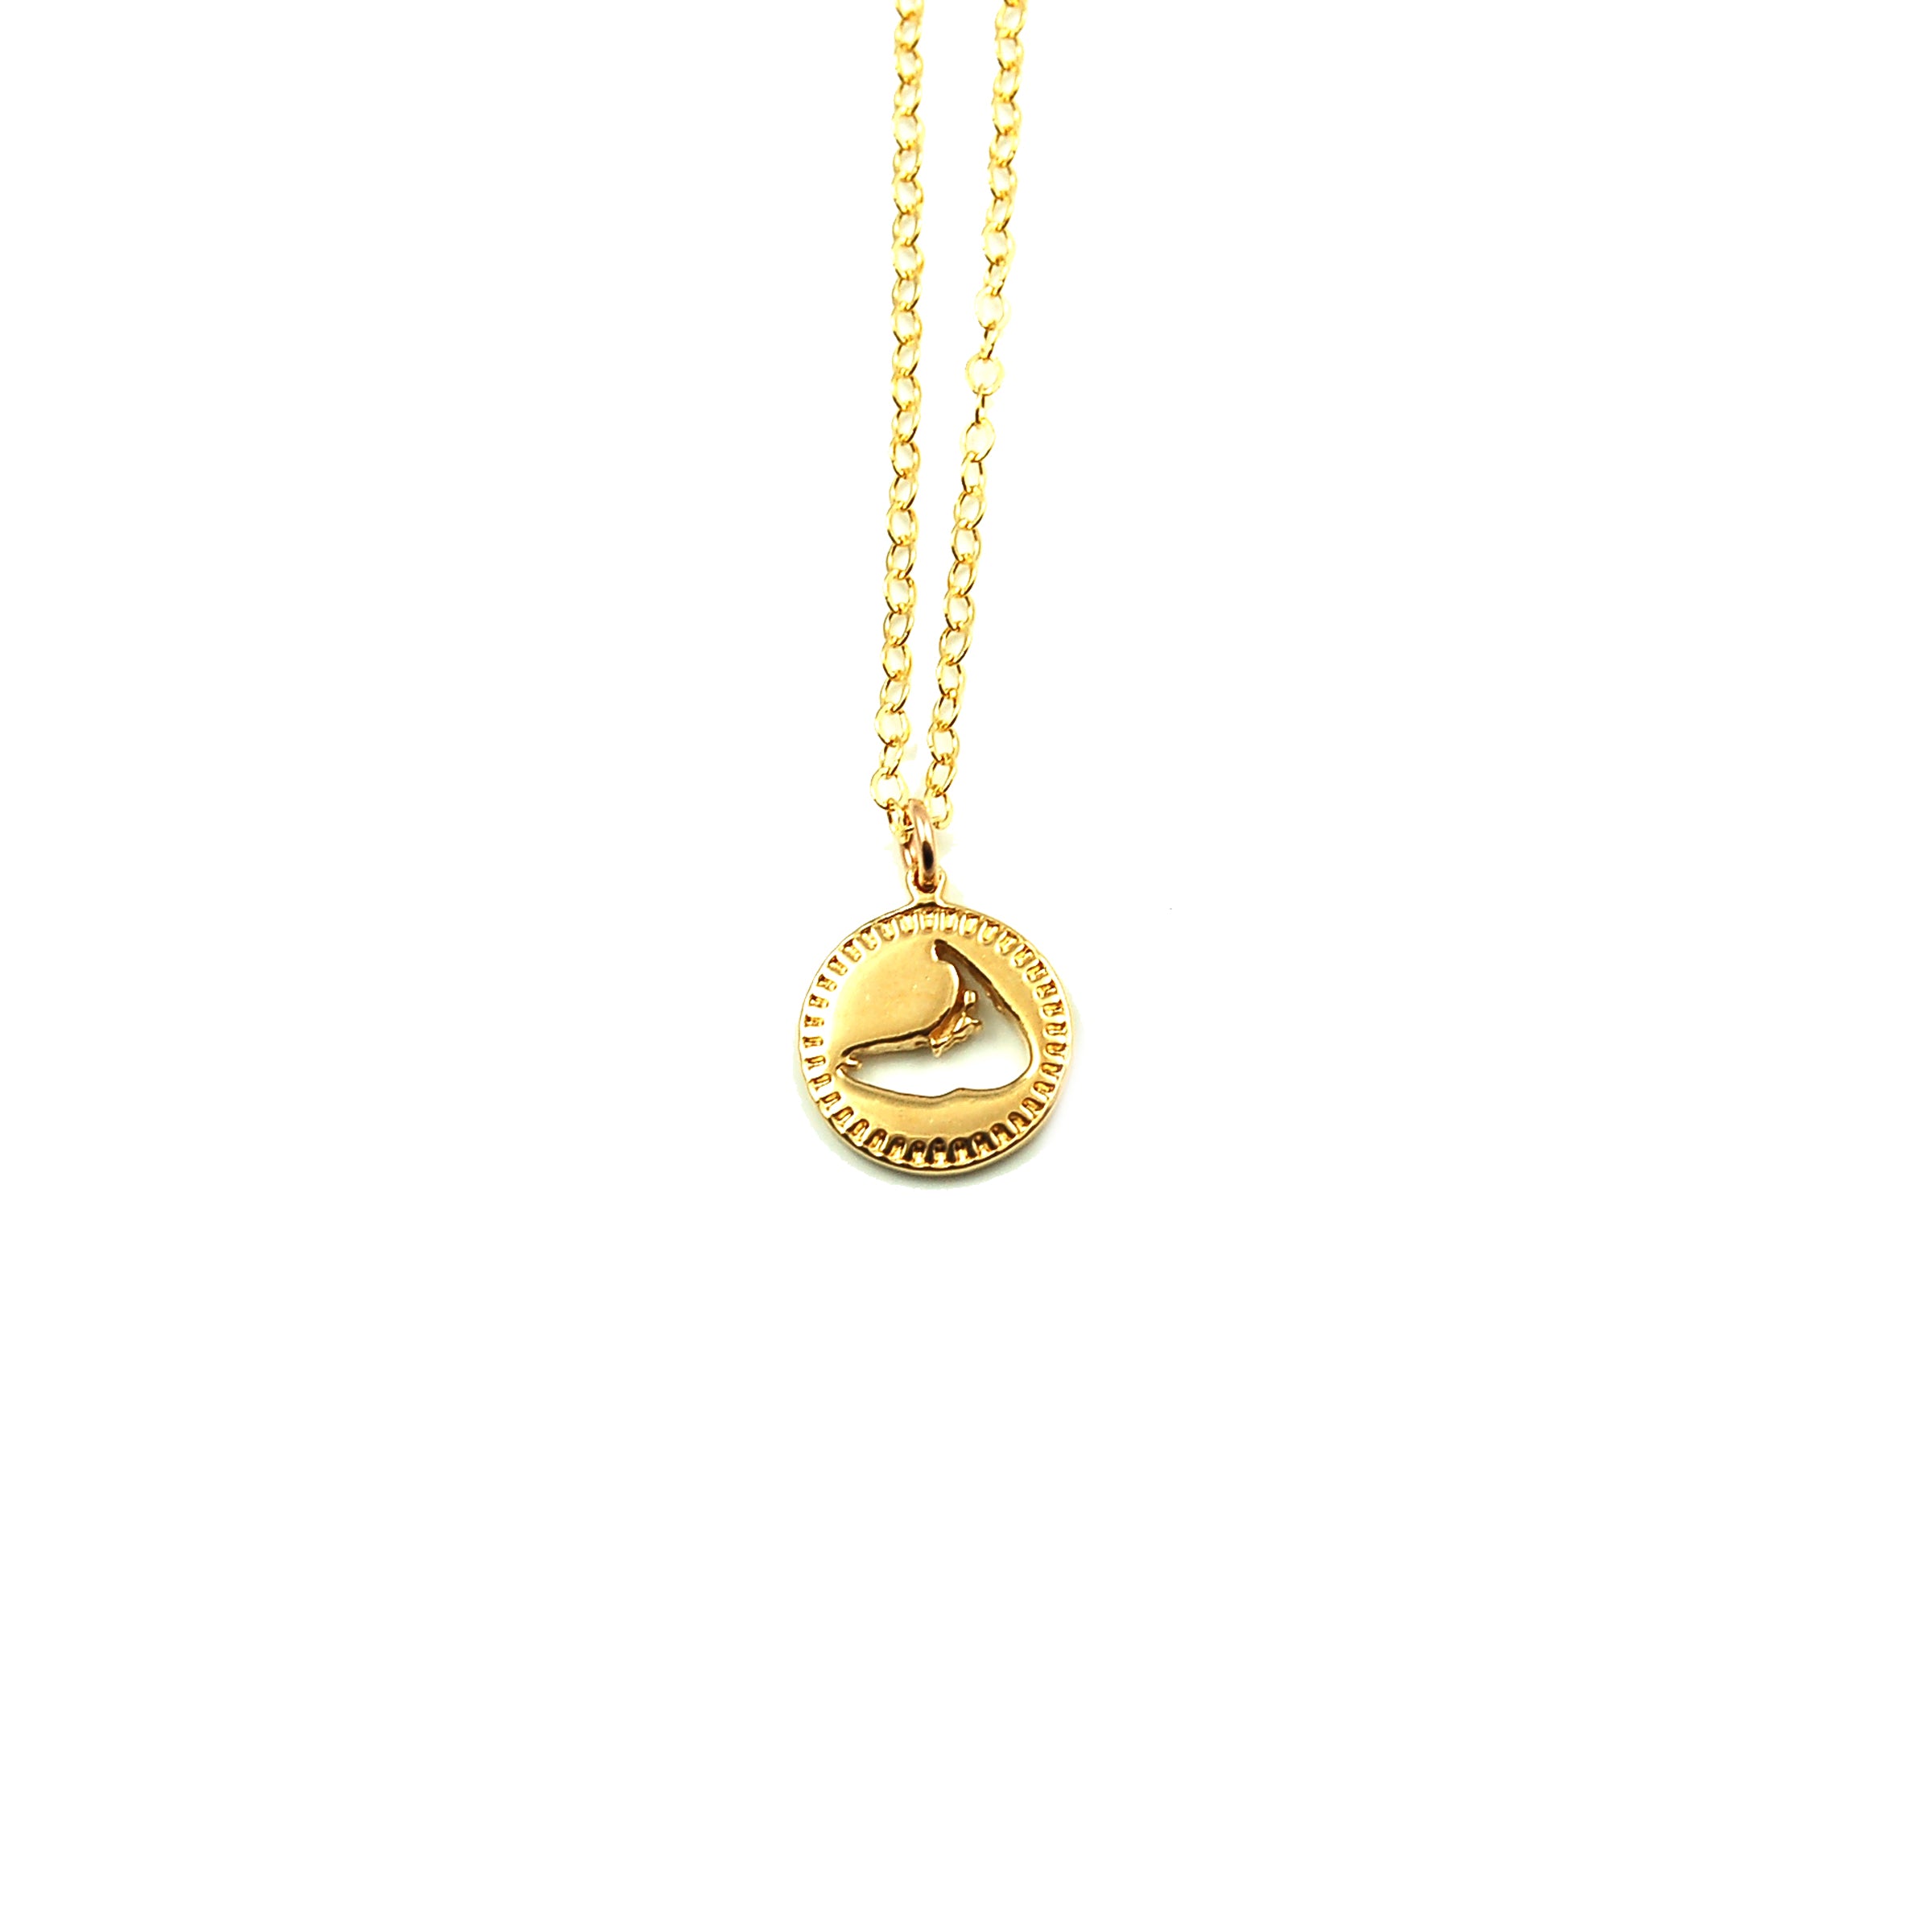 Nantucket Rays Necklace ©